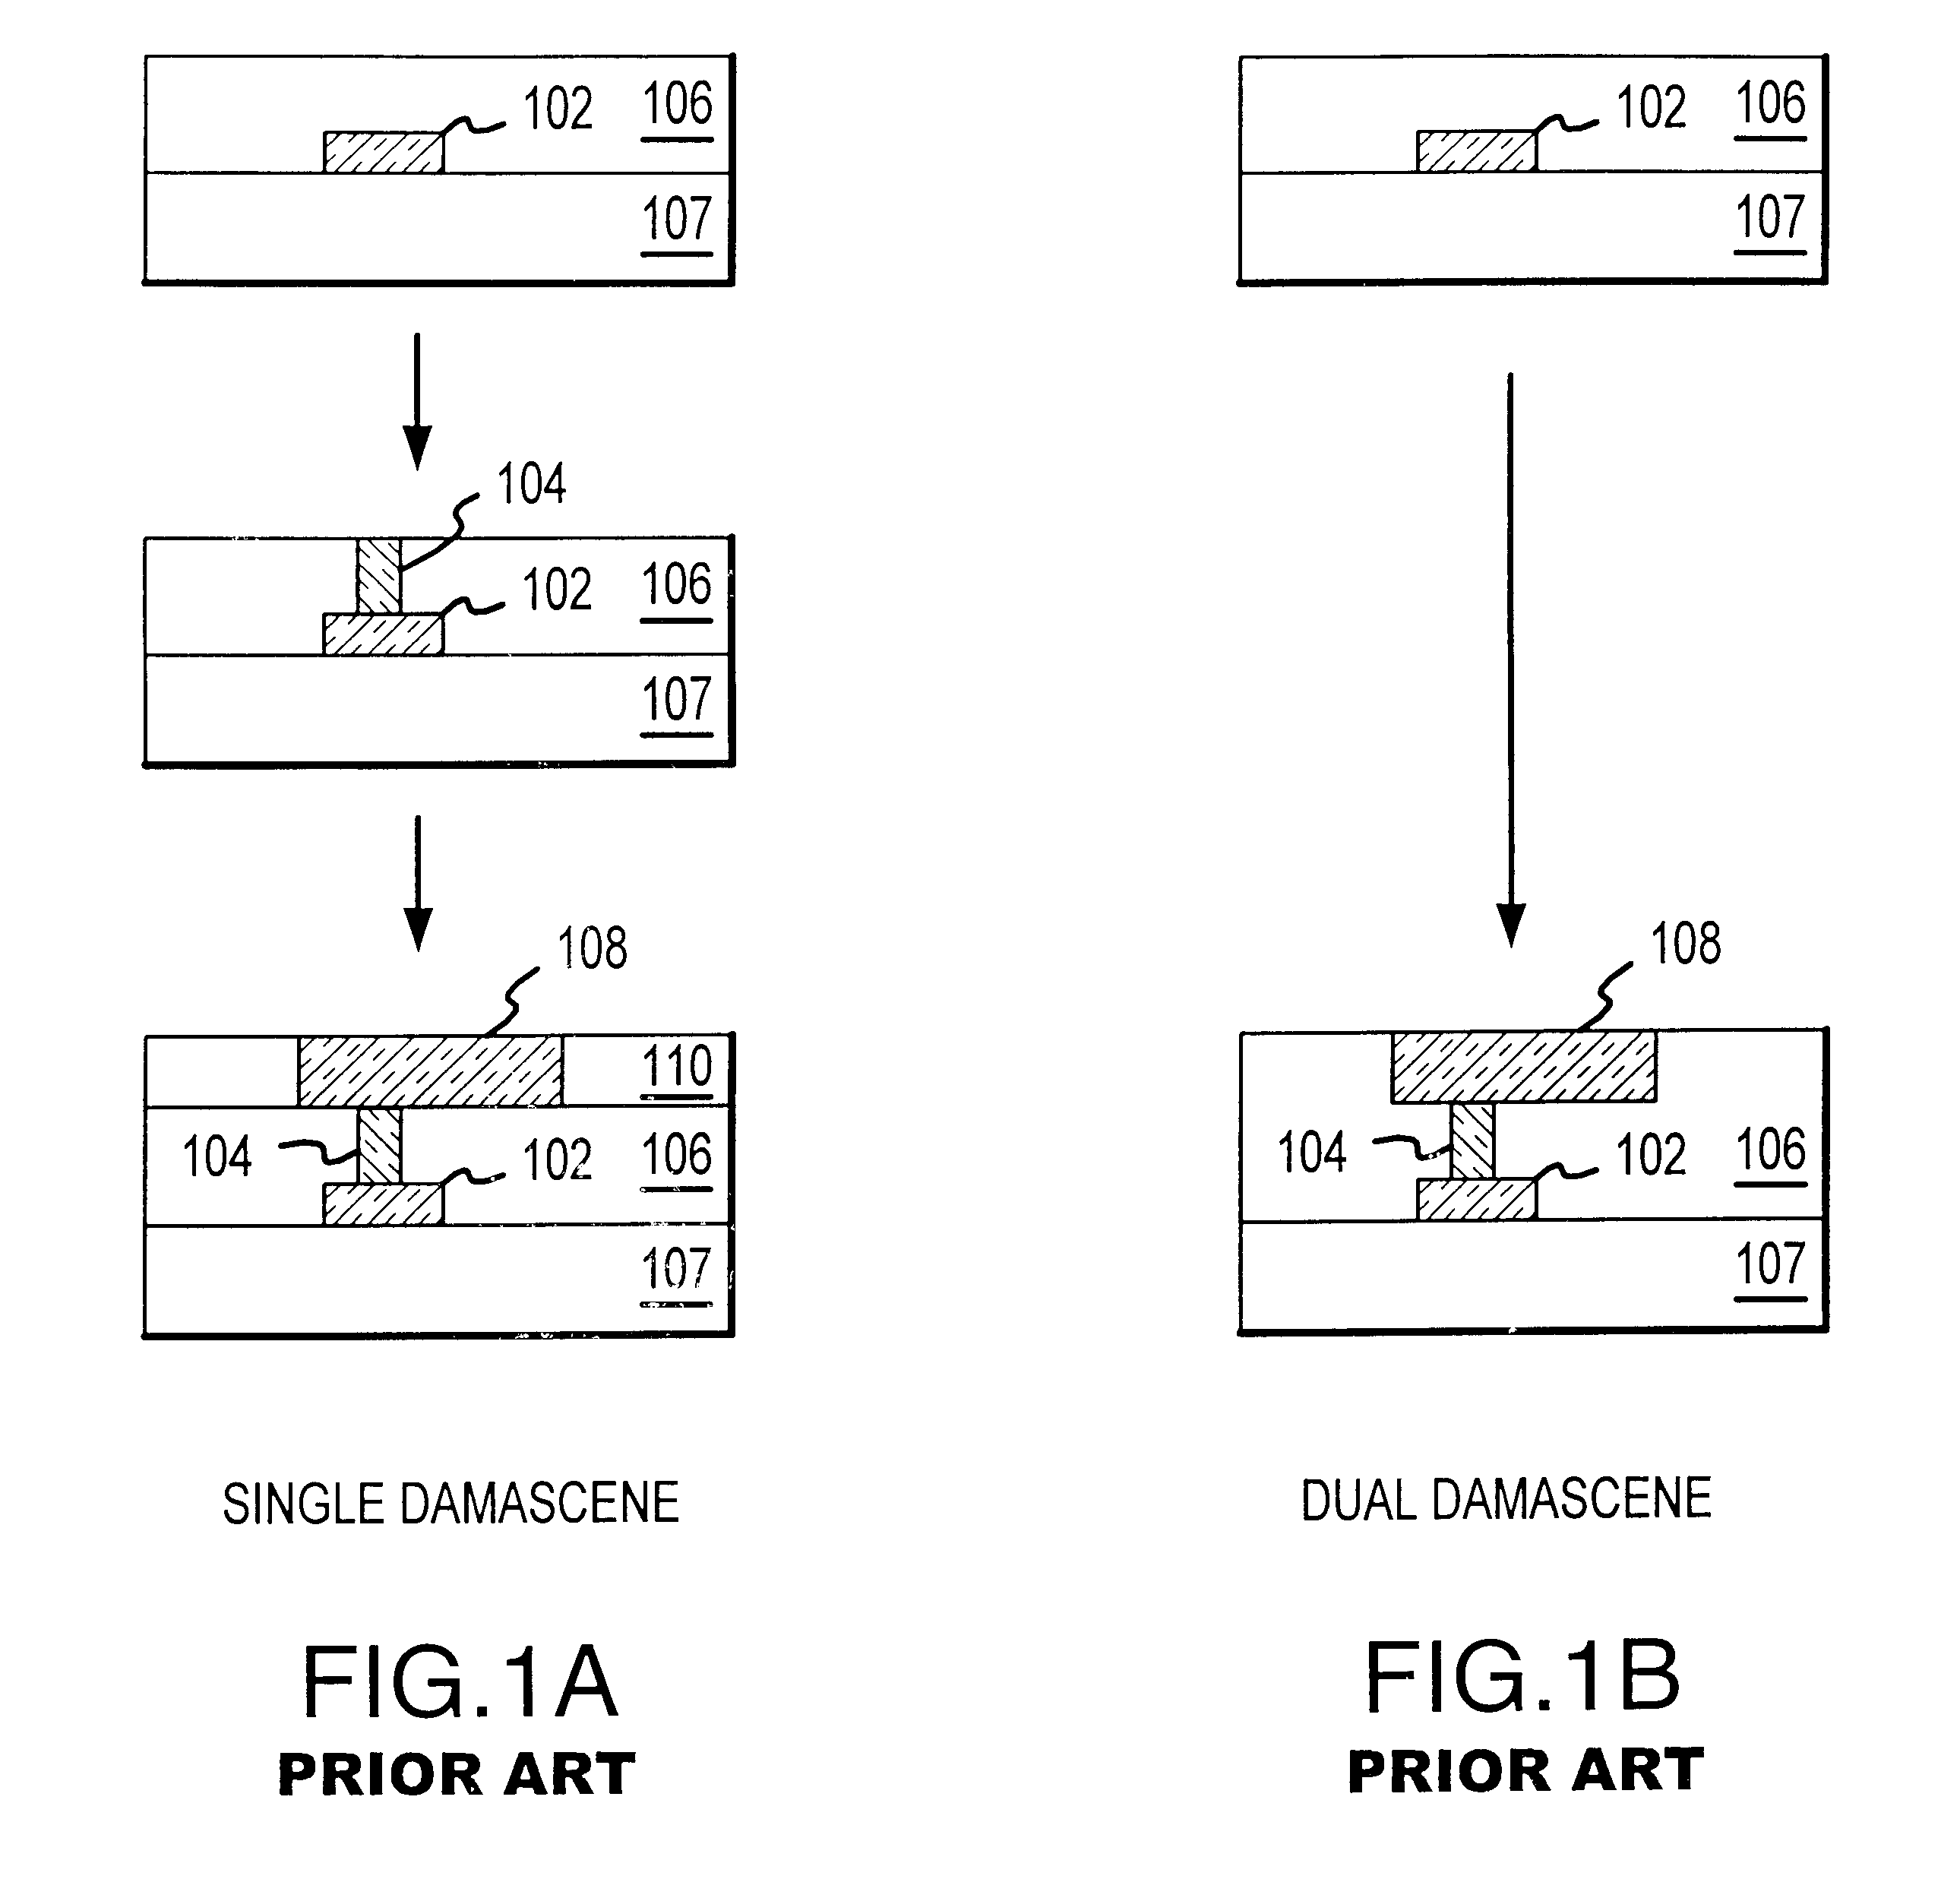 Dual-damascene interconnect structures and methods of fabricating same